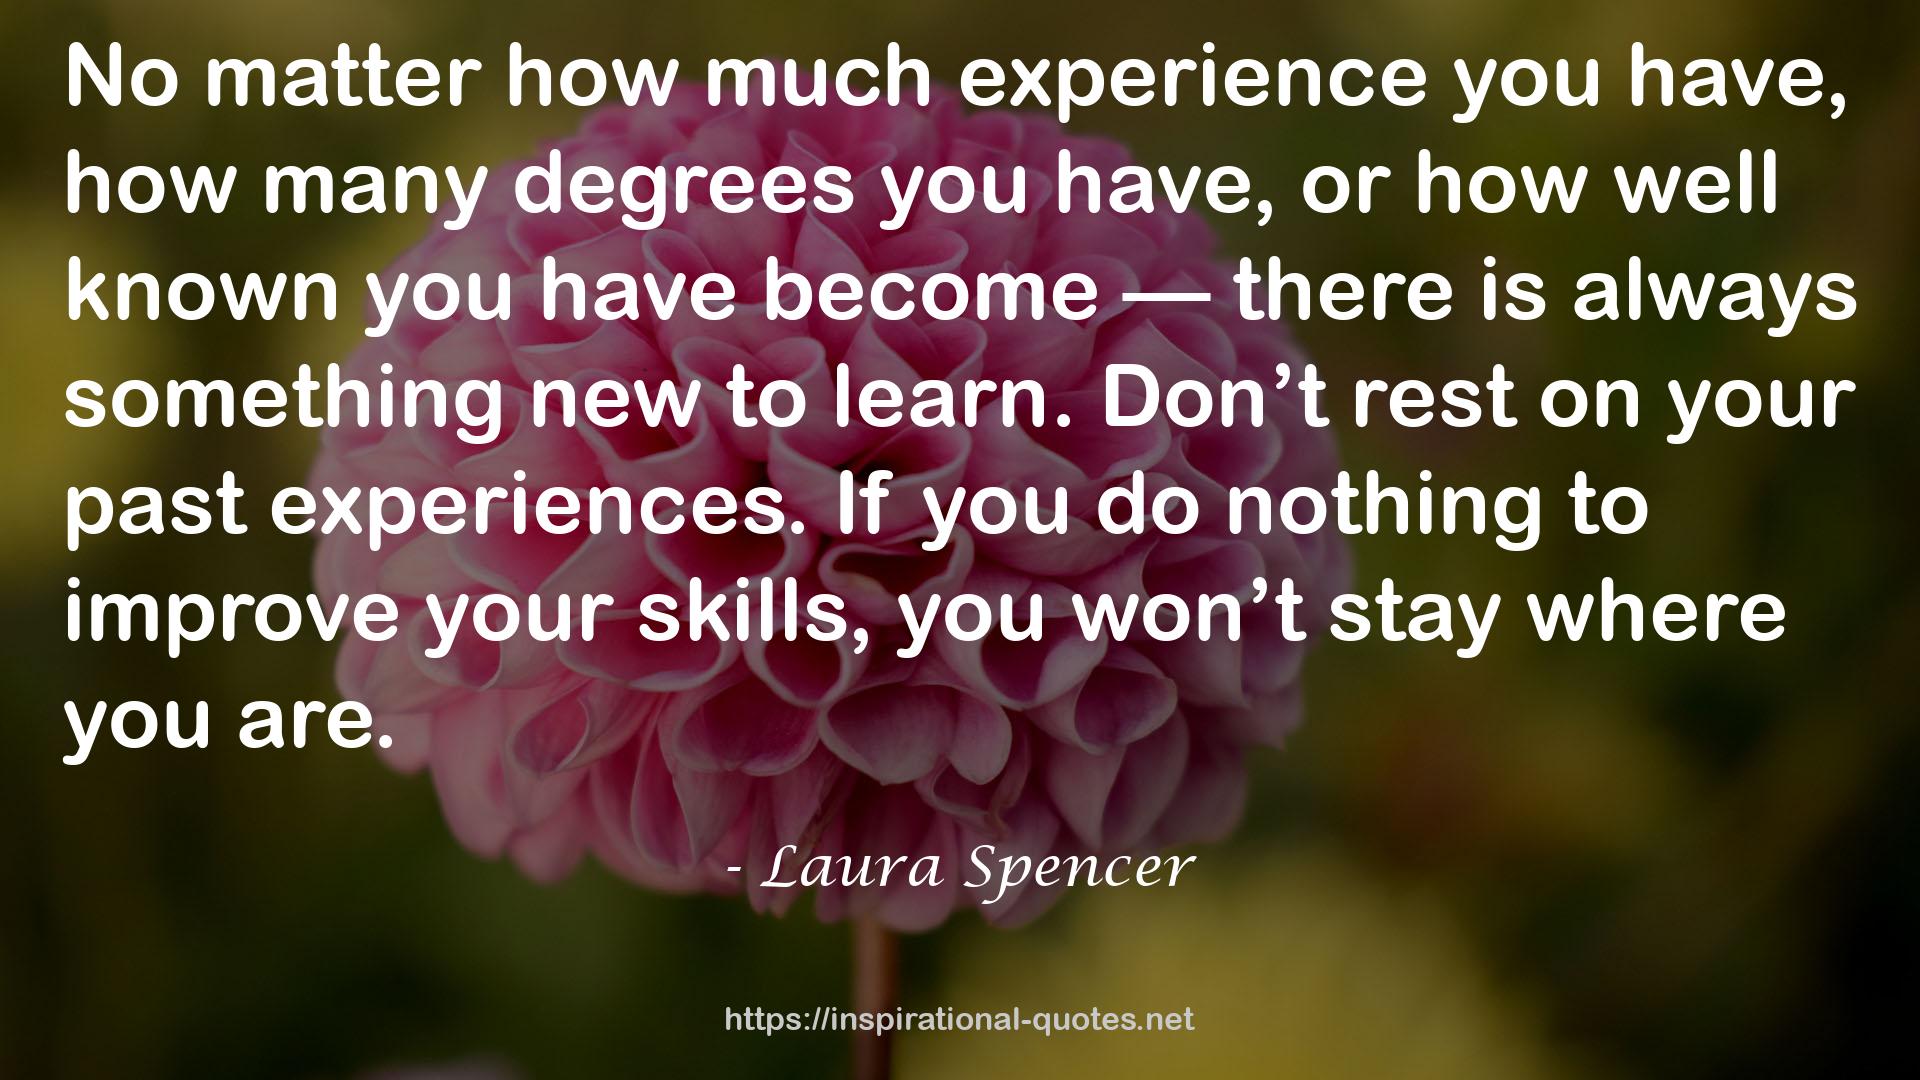 Laura Spencer QUOTES